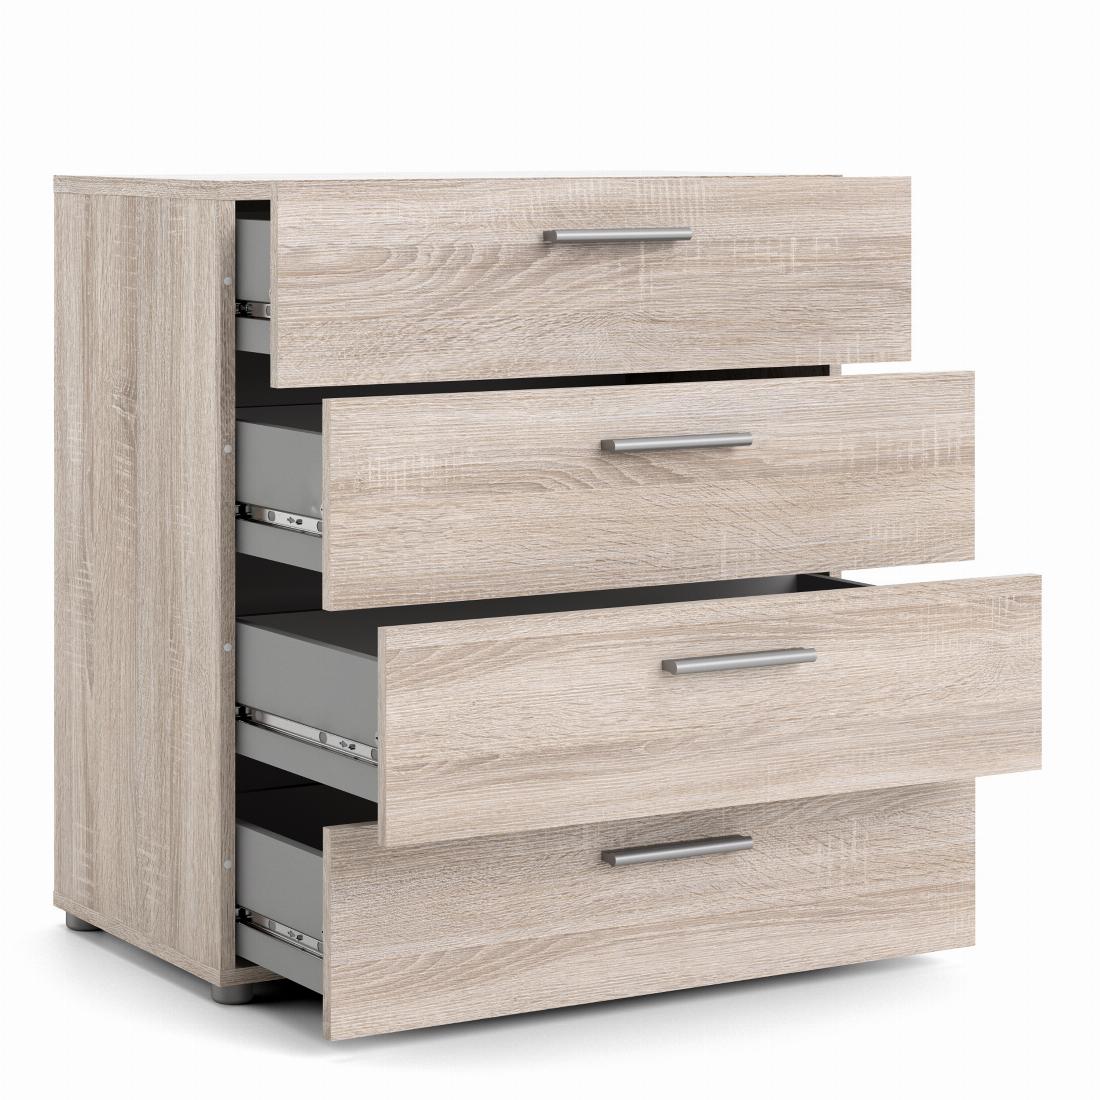 Pepe Chest of 4 Drawers in Truffle Oak